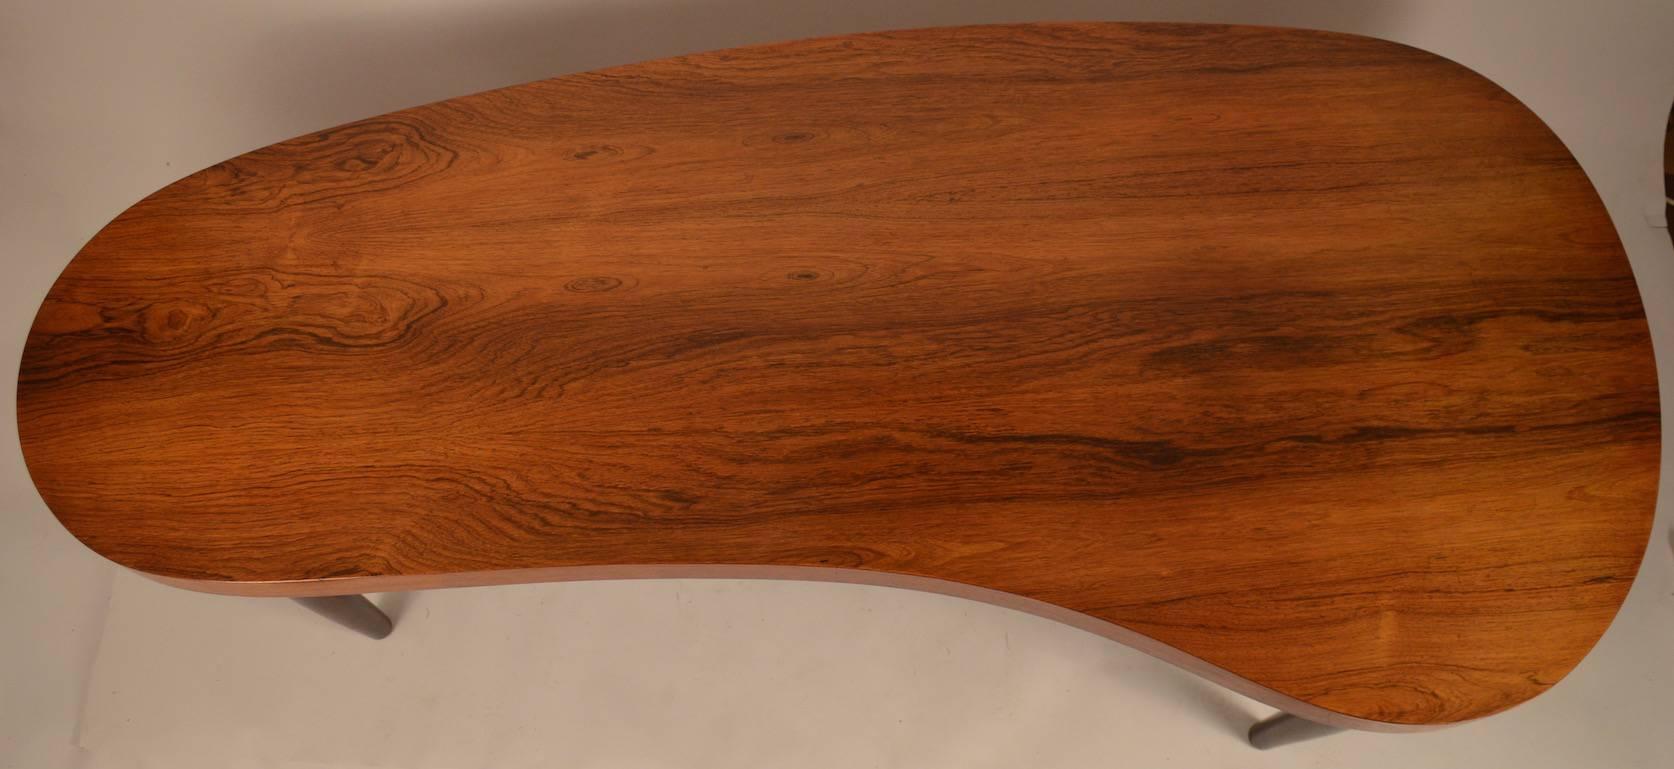 Mid-20th Century Extra Long Custom-Made Rosewood Coffee Table after Rohde For Sale